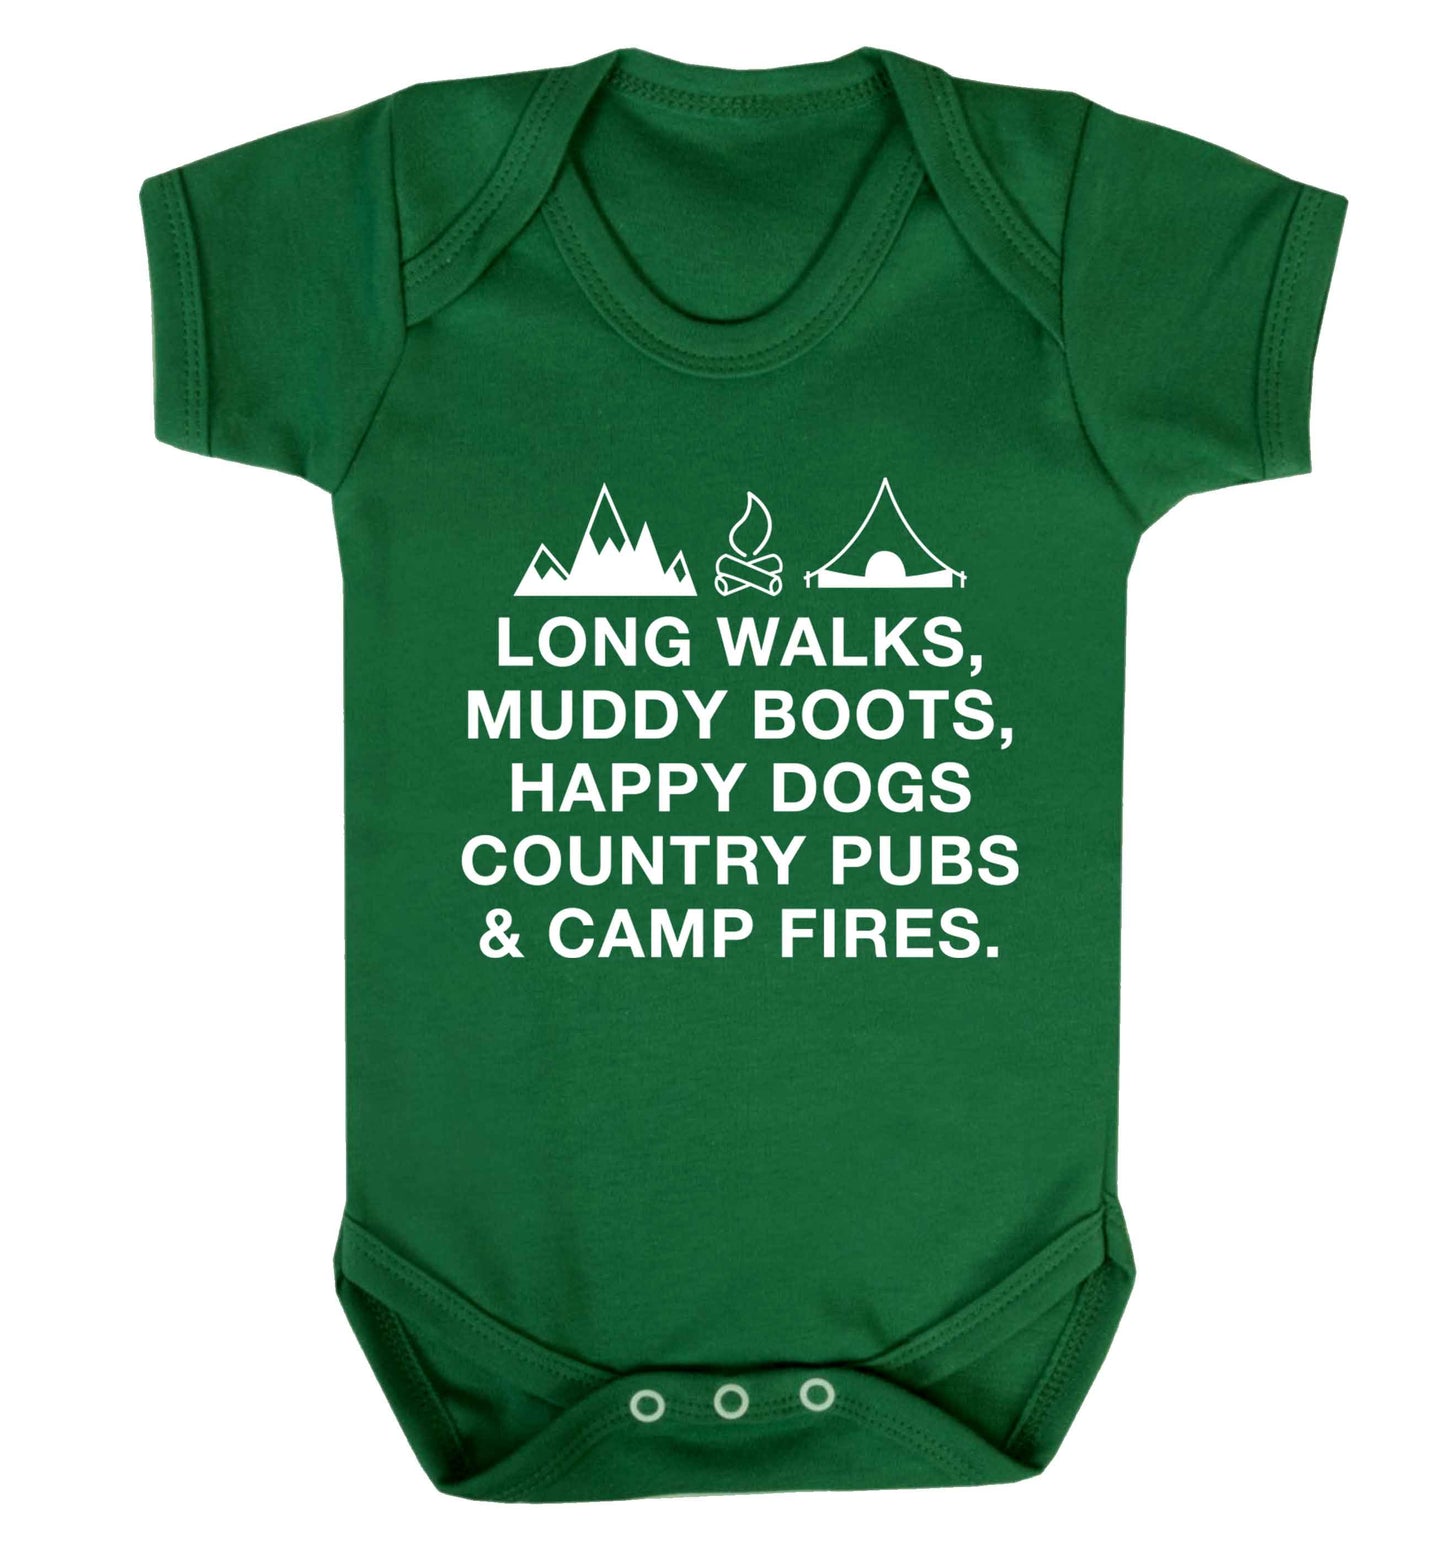 Long walks muddy boots happy dogs country pubs and camp fires Baby Vest green 18-24 months